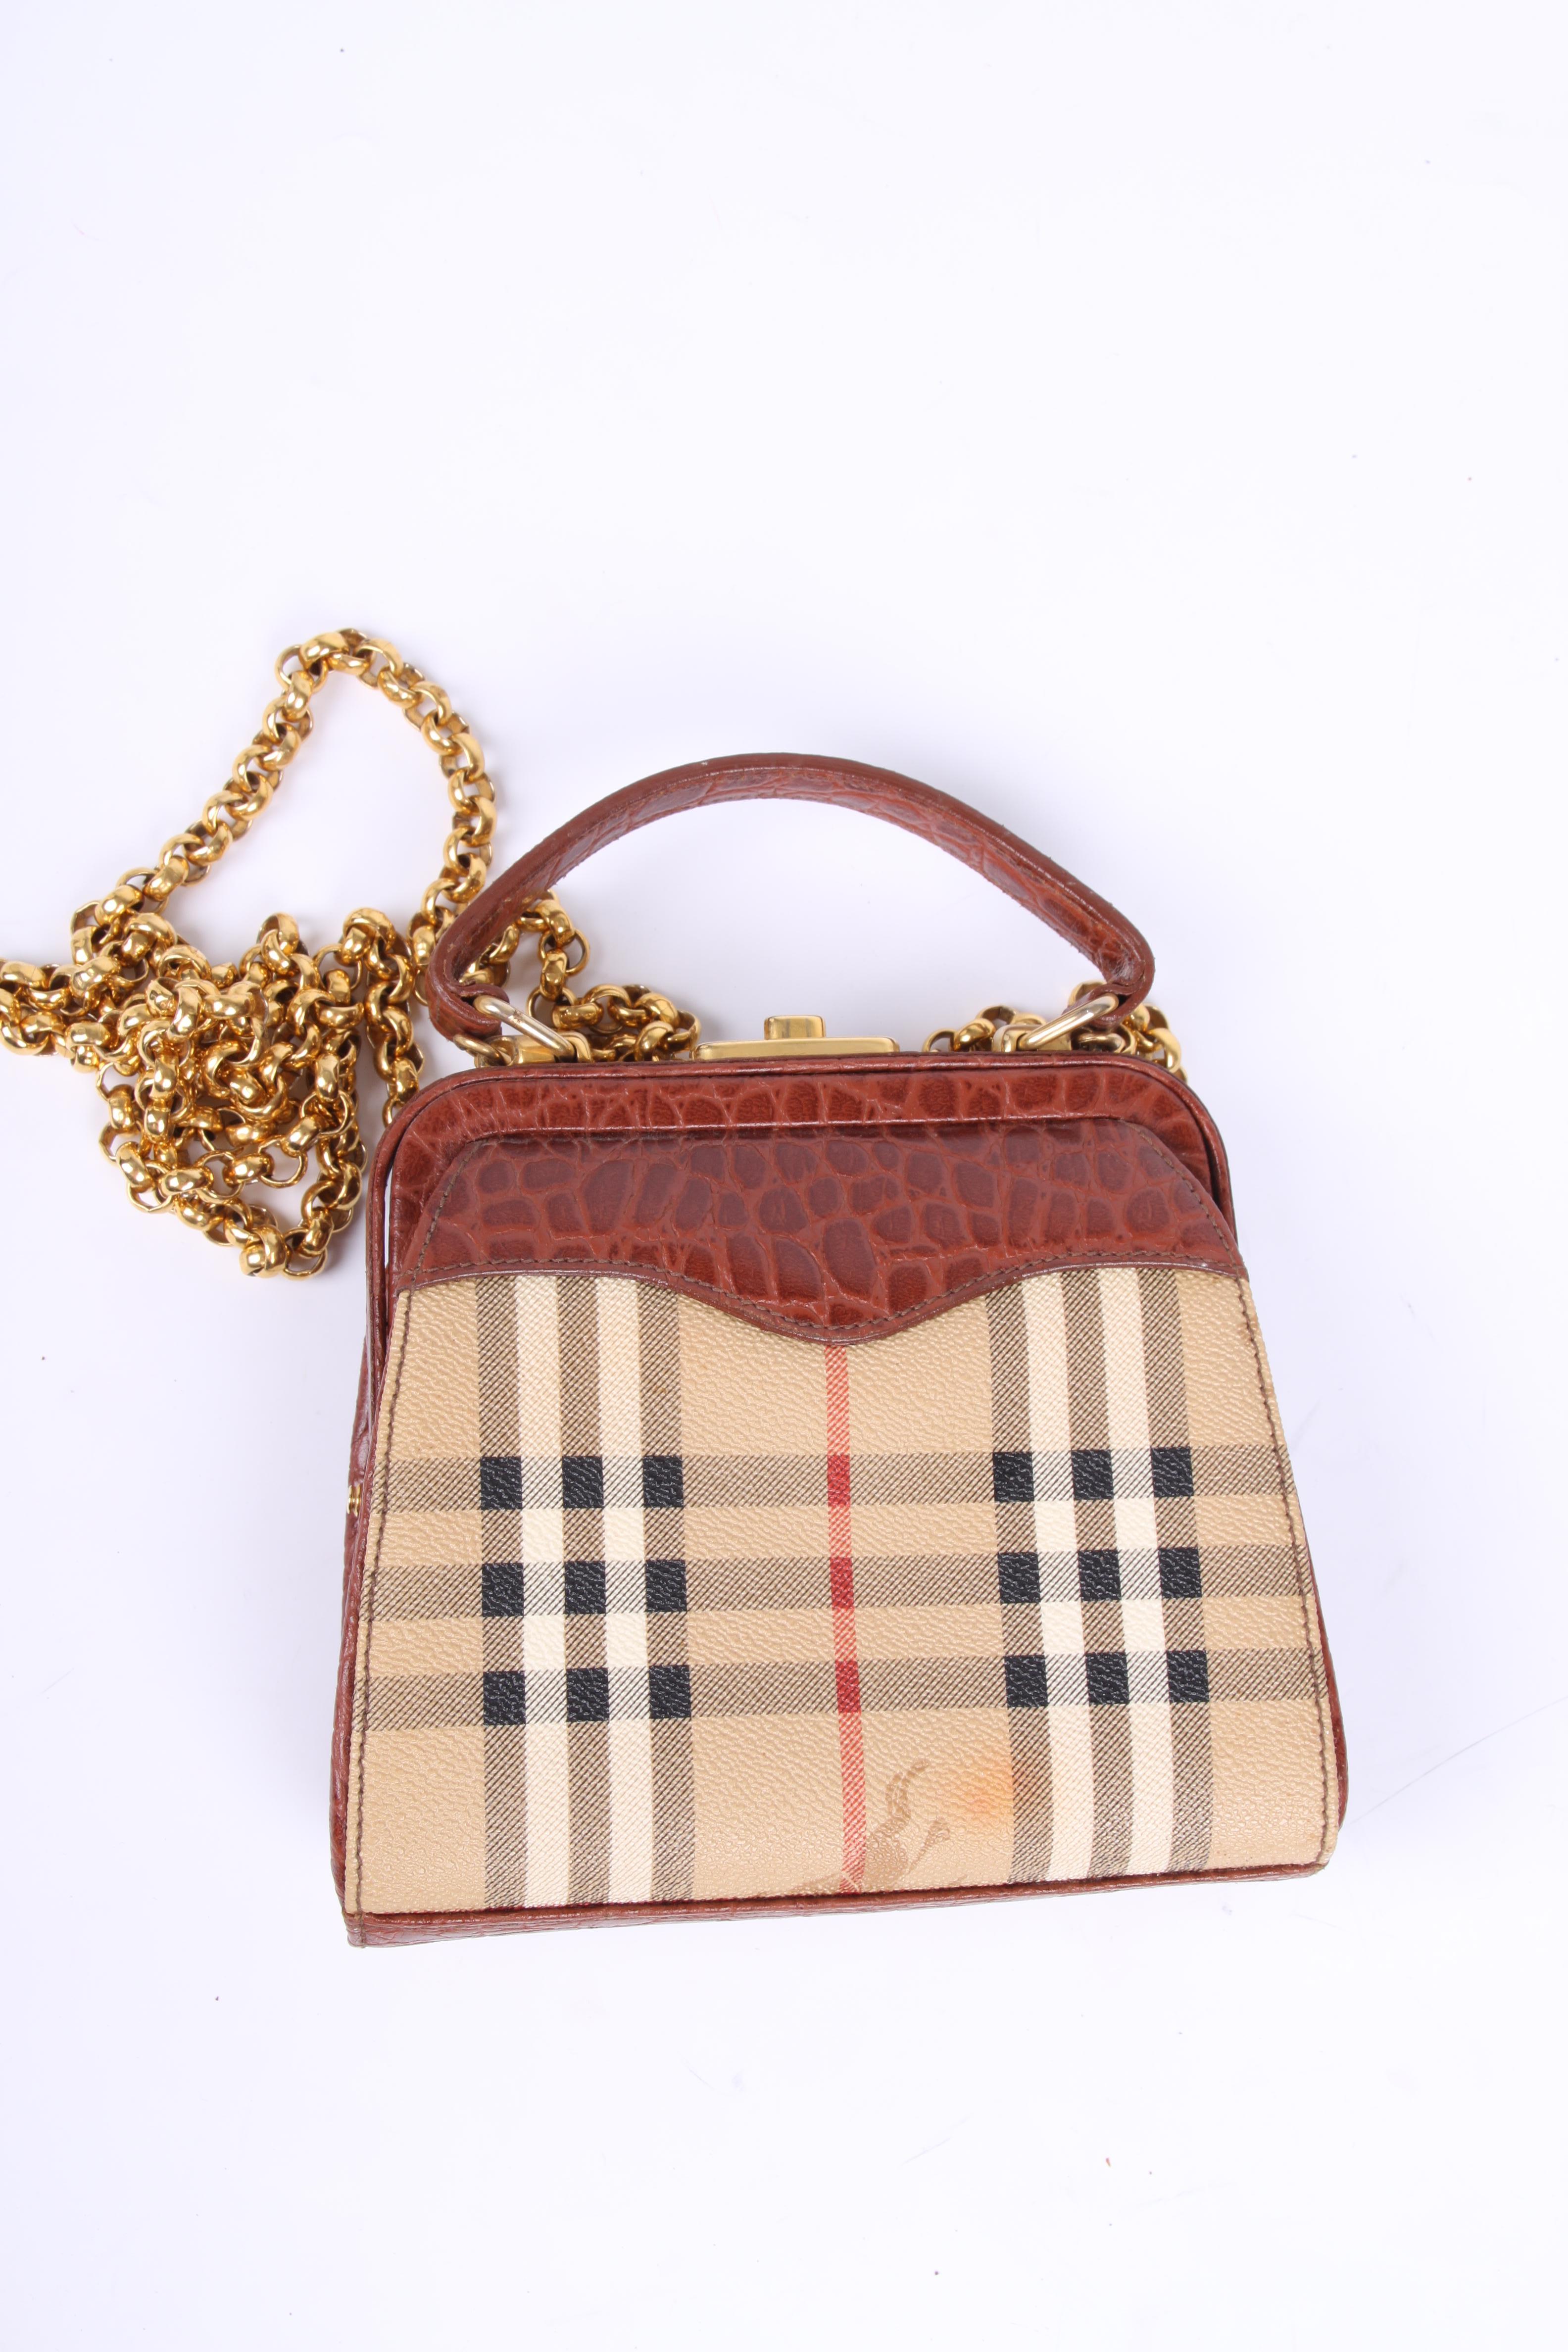 Burberry Vintage Canvas & Leather Shoulder/Crossbody Bag - brown In Fair Condition For Sale In Baarn, NL